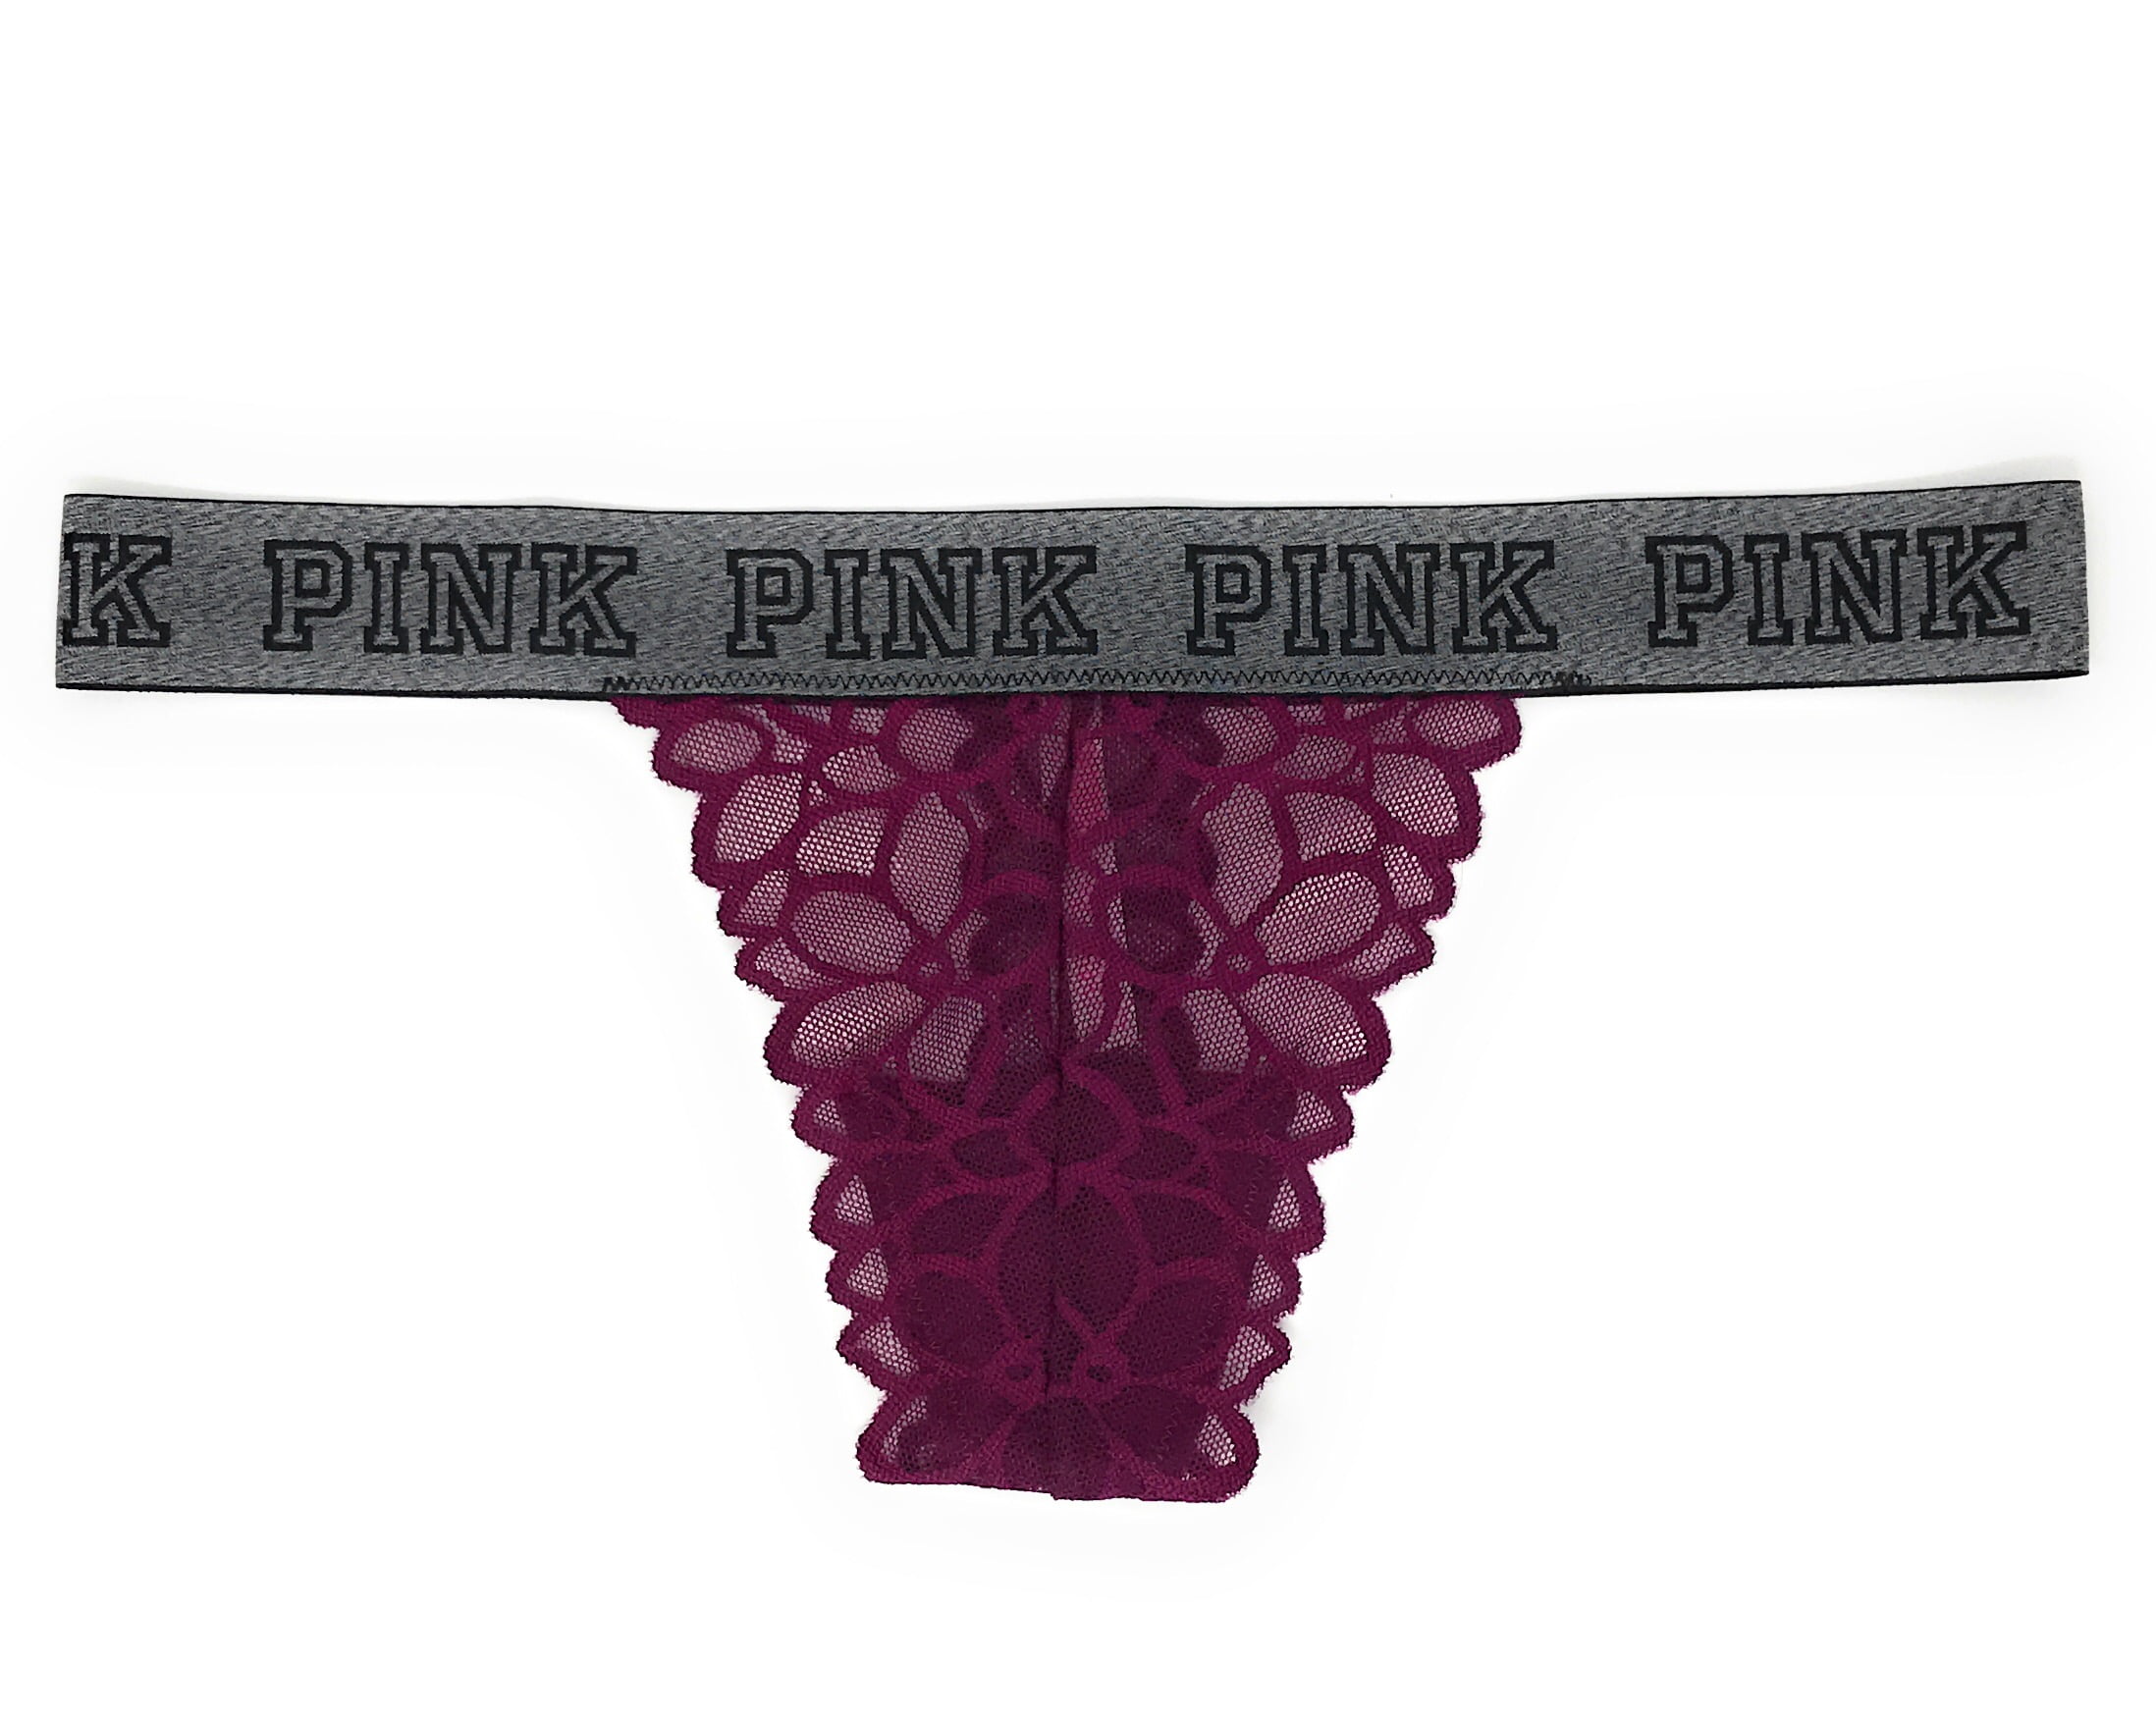 Victoria's secret Logo Thong Panty for sale in South Africa